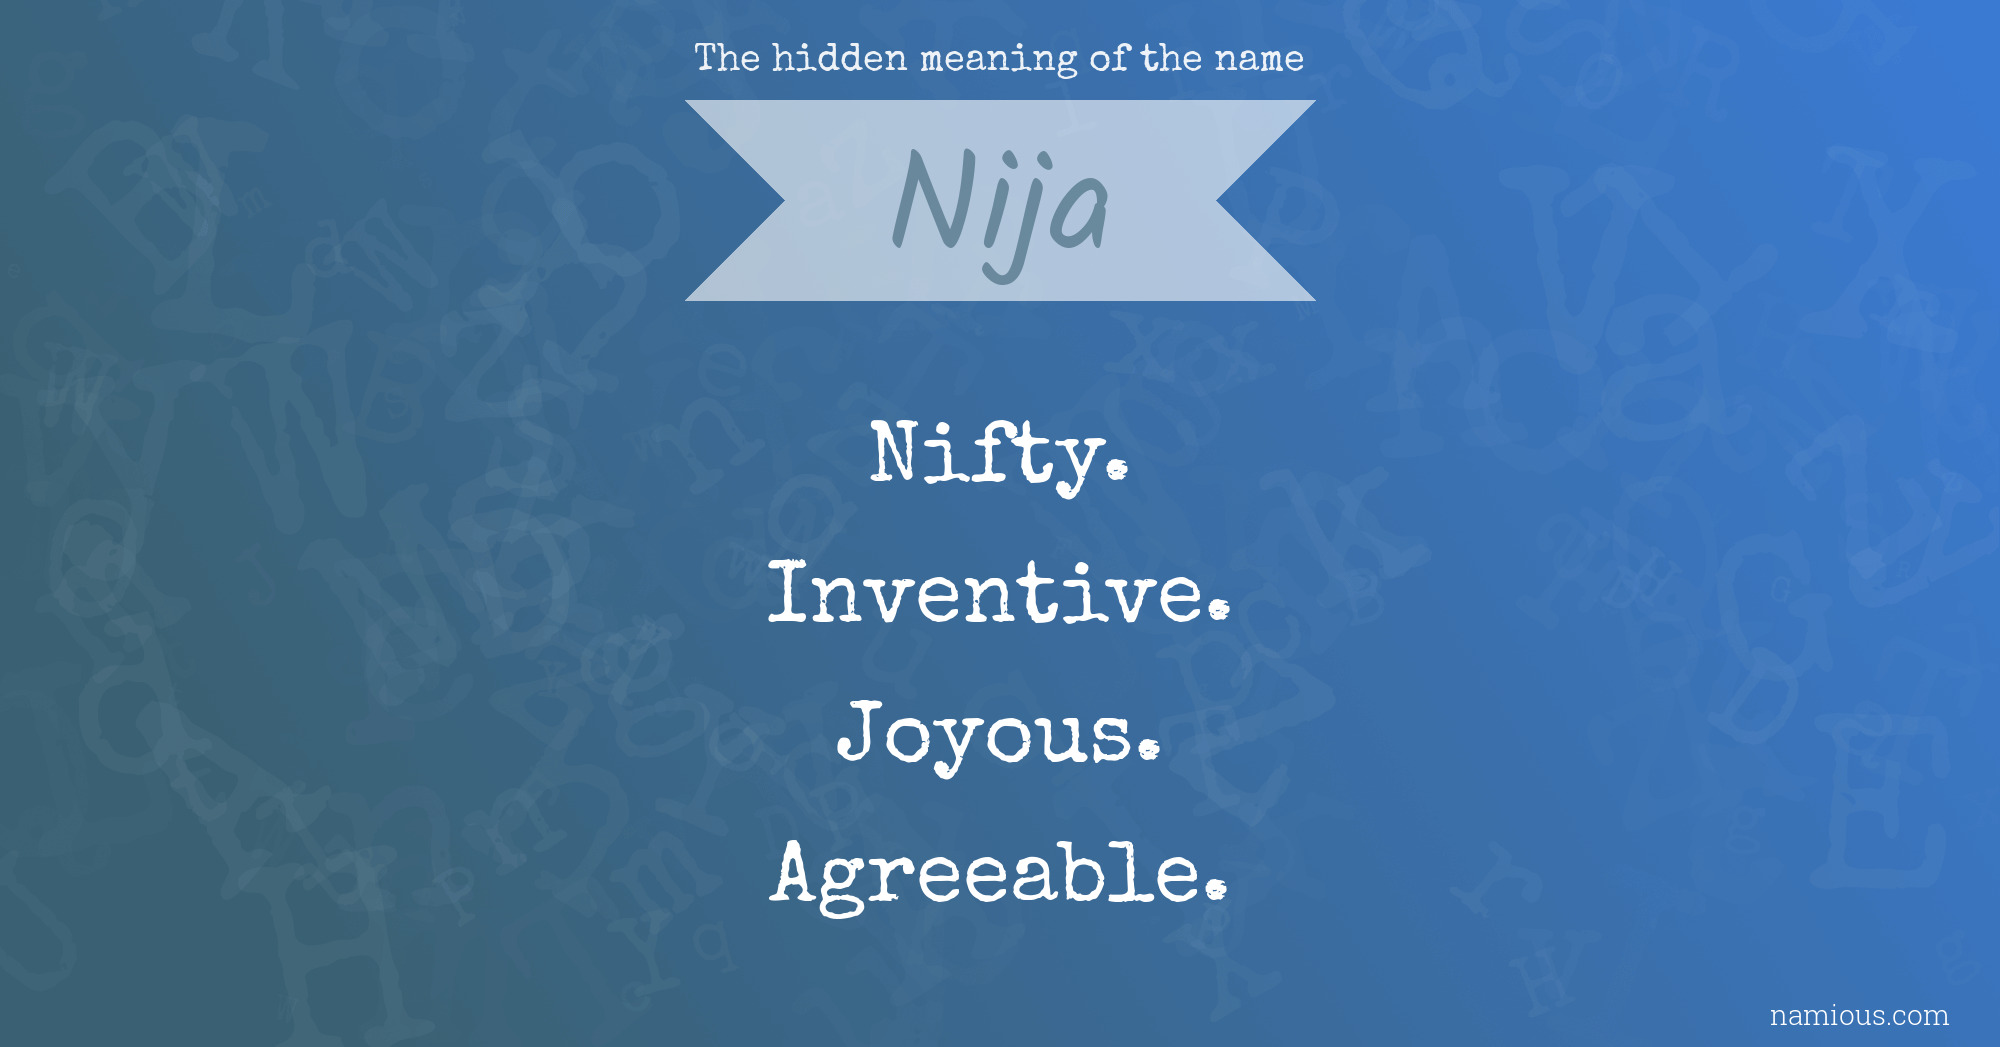 The hidden meaning of the name Nija